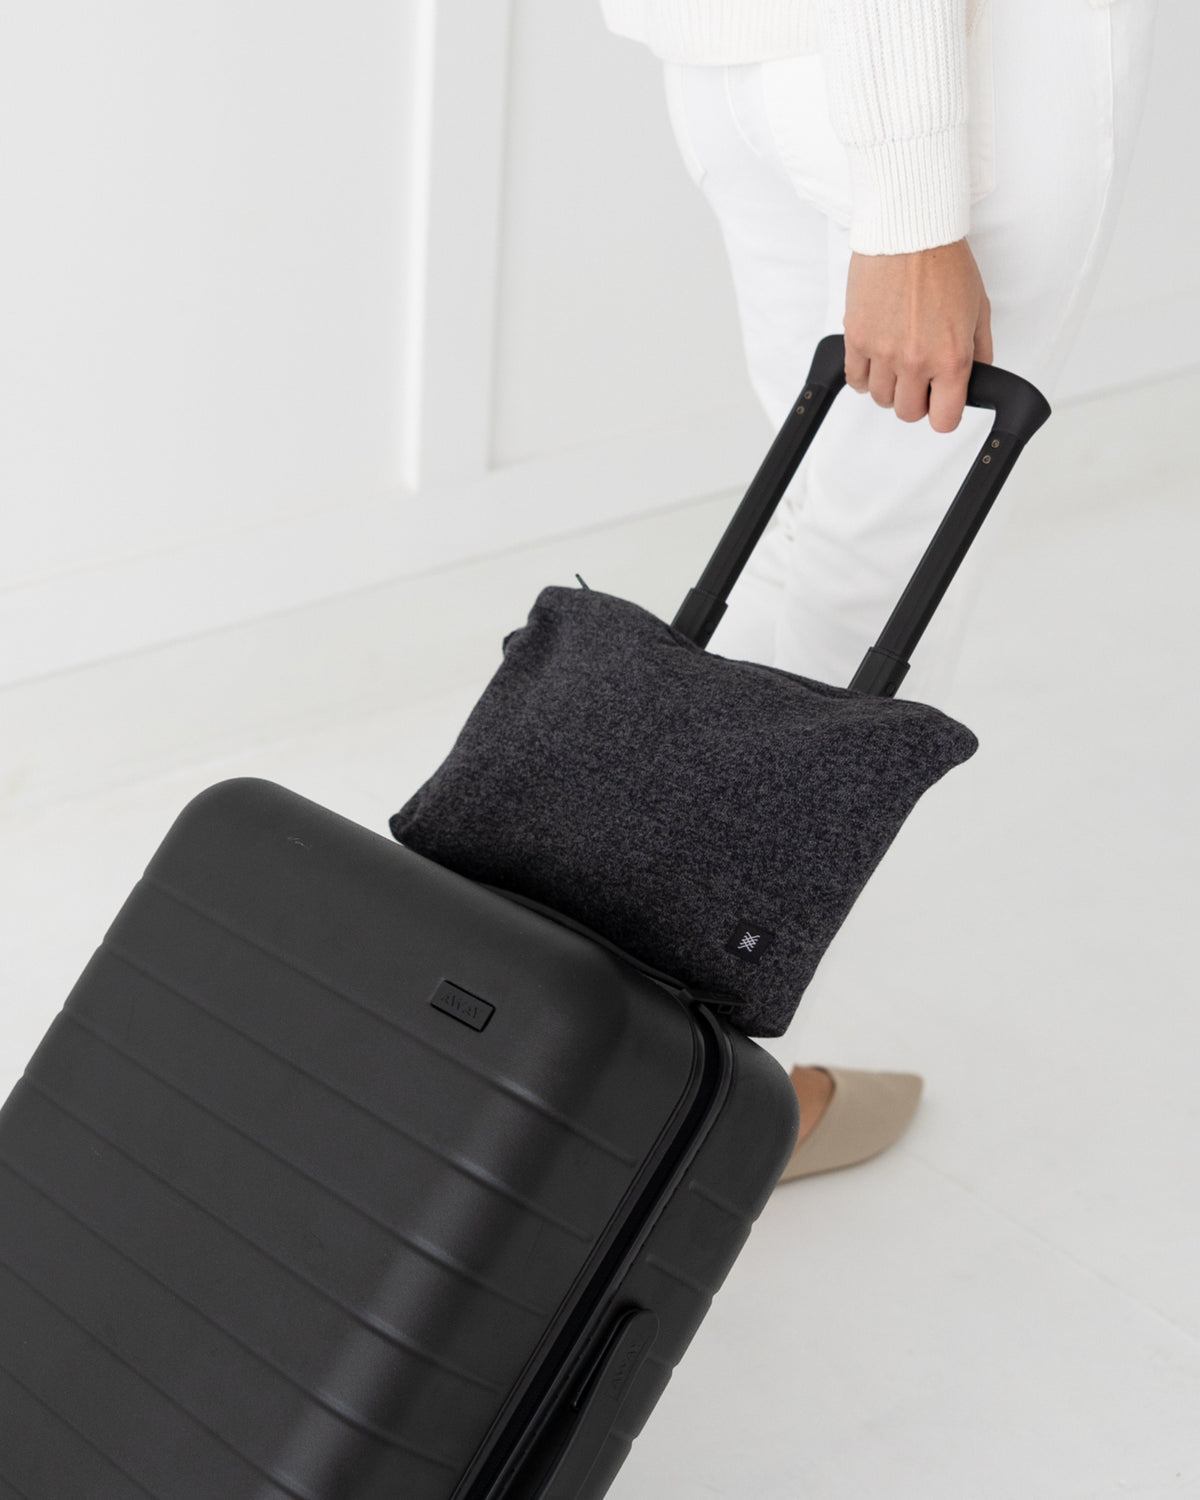 Woman pulling a suitcase with Graphite Carry Pouch, which is a gray carry pouch, attached over the suitcase handle